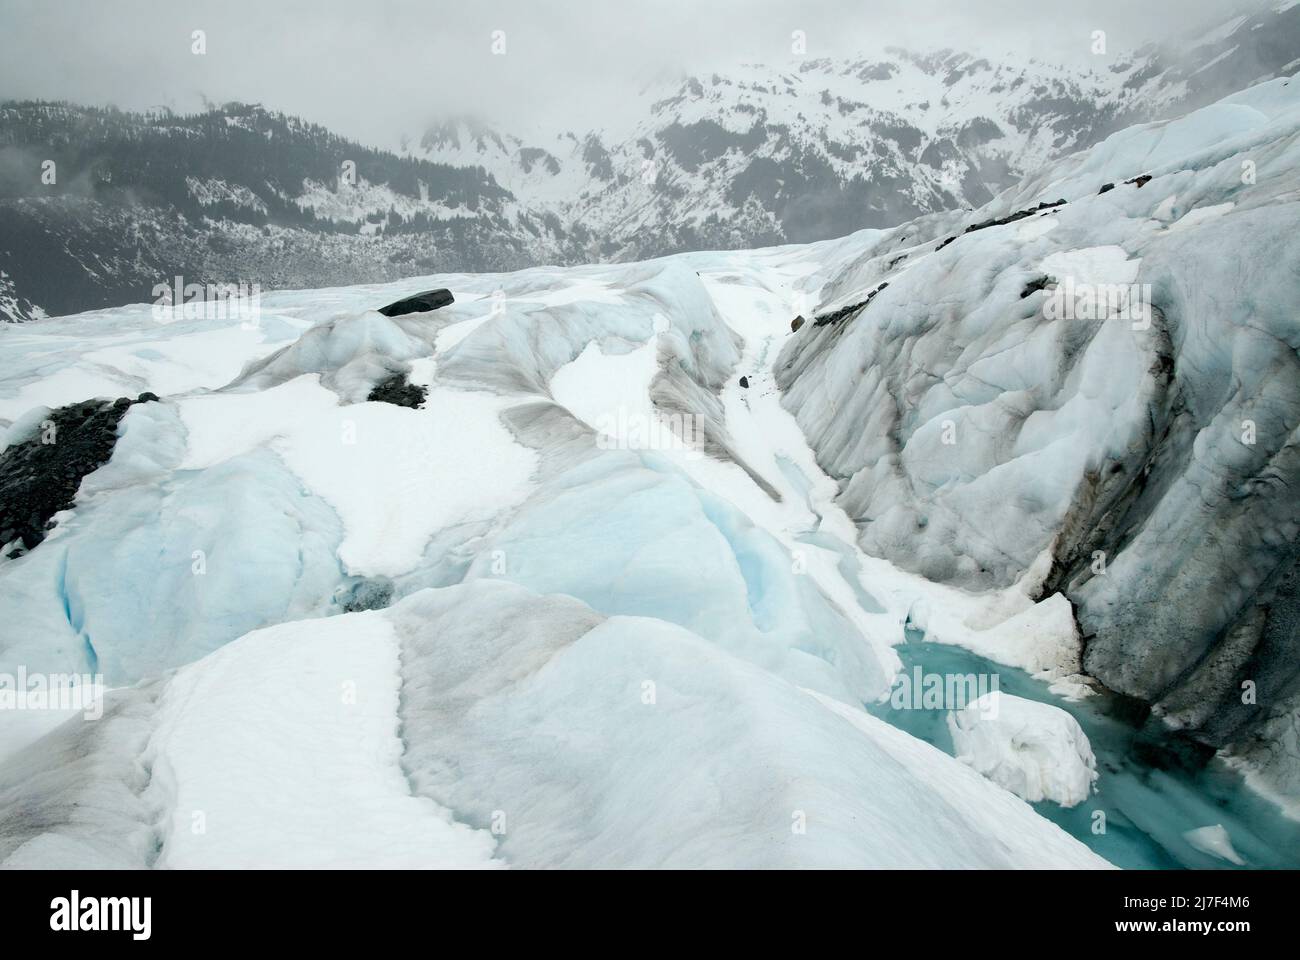 Mendenhall Glacier, near Juneau, is a popular location for adventure tourism. Stock Photo